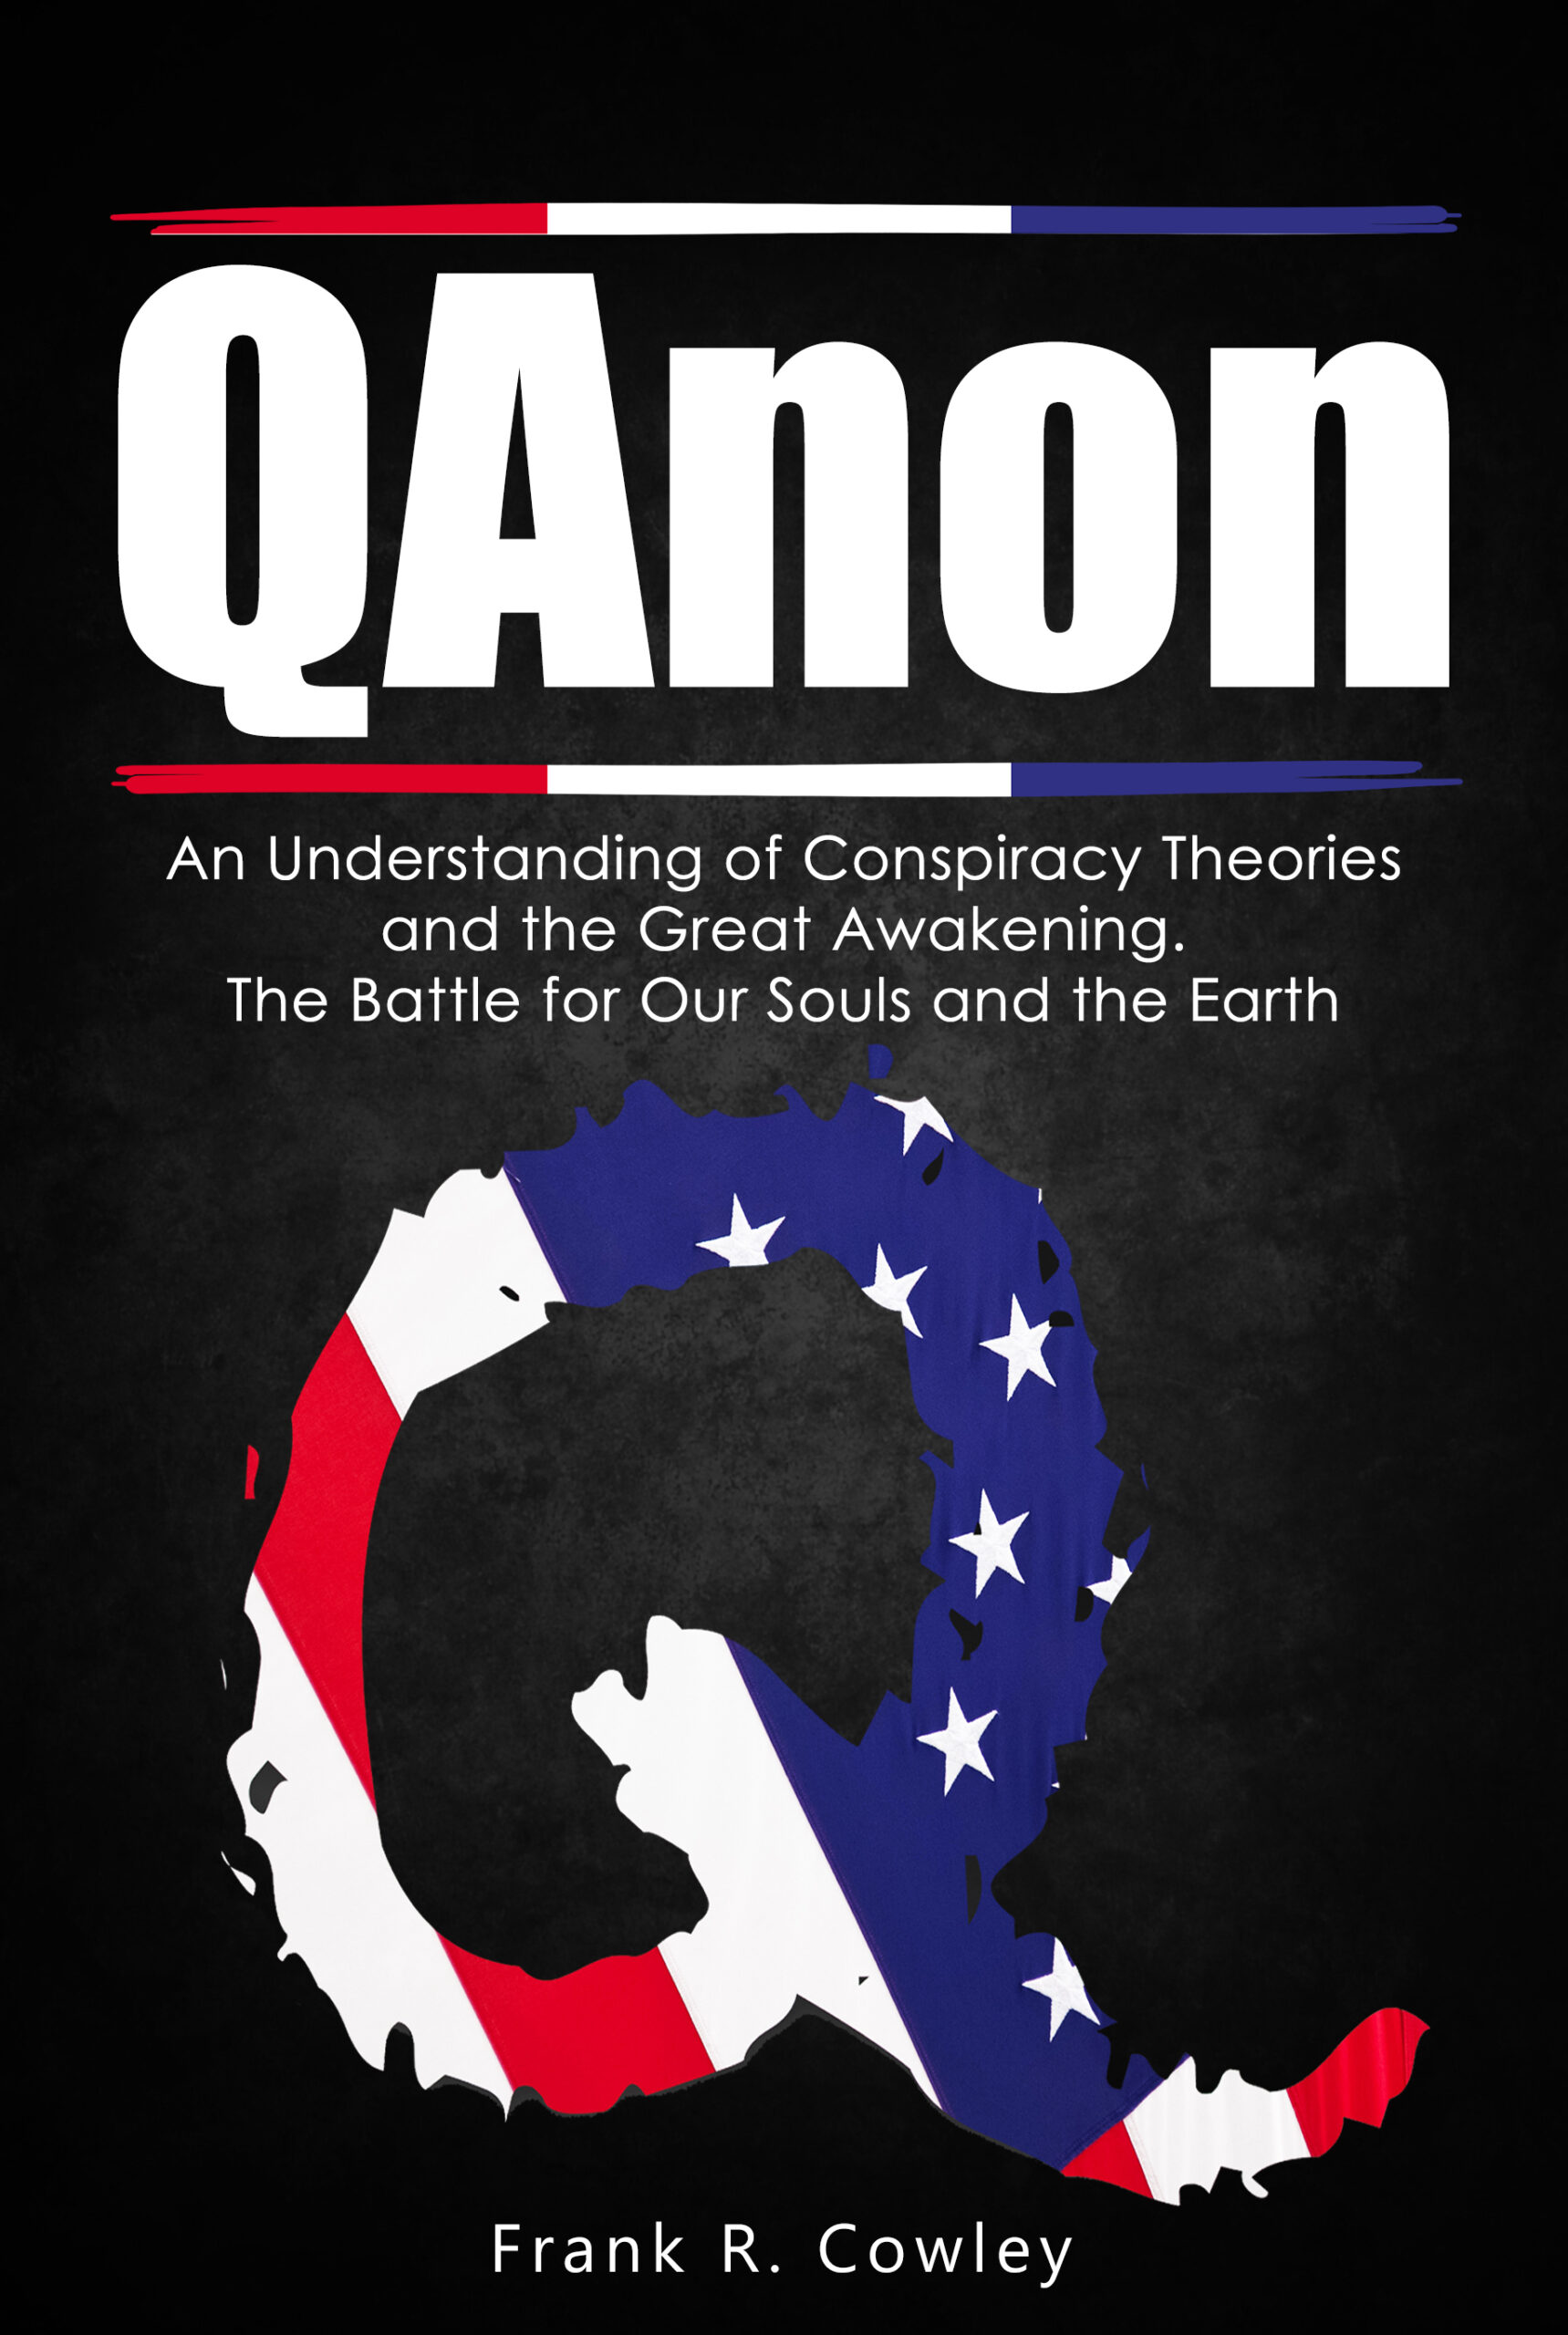 FREE: Qanon: An Understanding of Conspiracy Theories and the Great Awakening. The Battle for Our Souls and the Earth by Frank R. Cowley